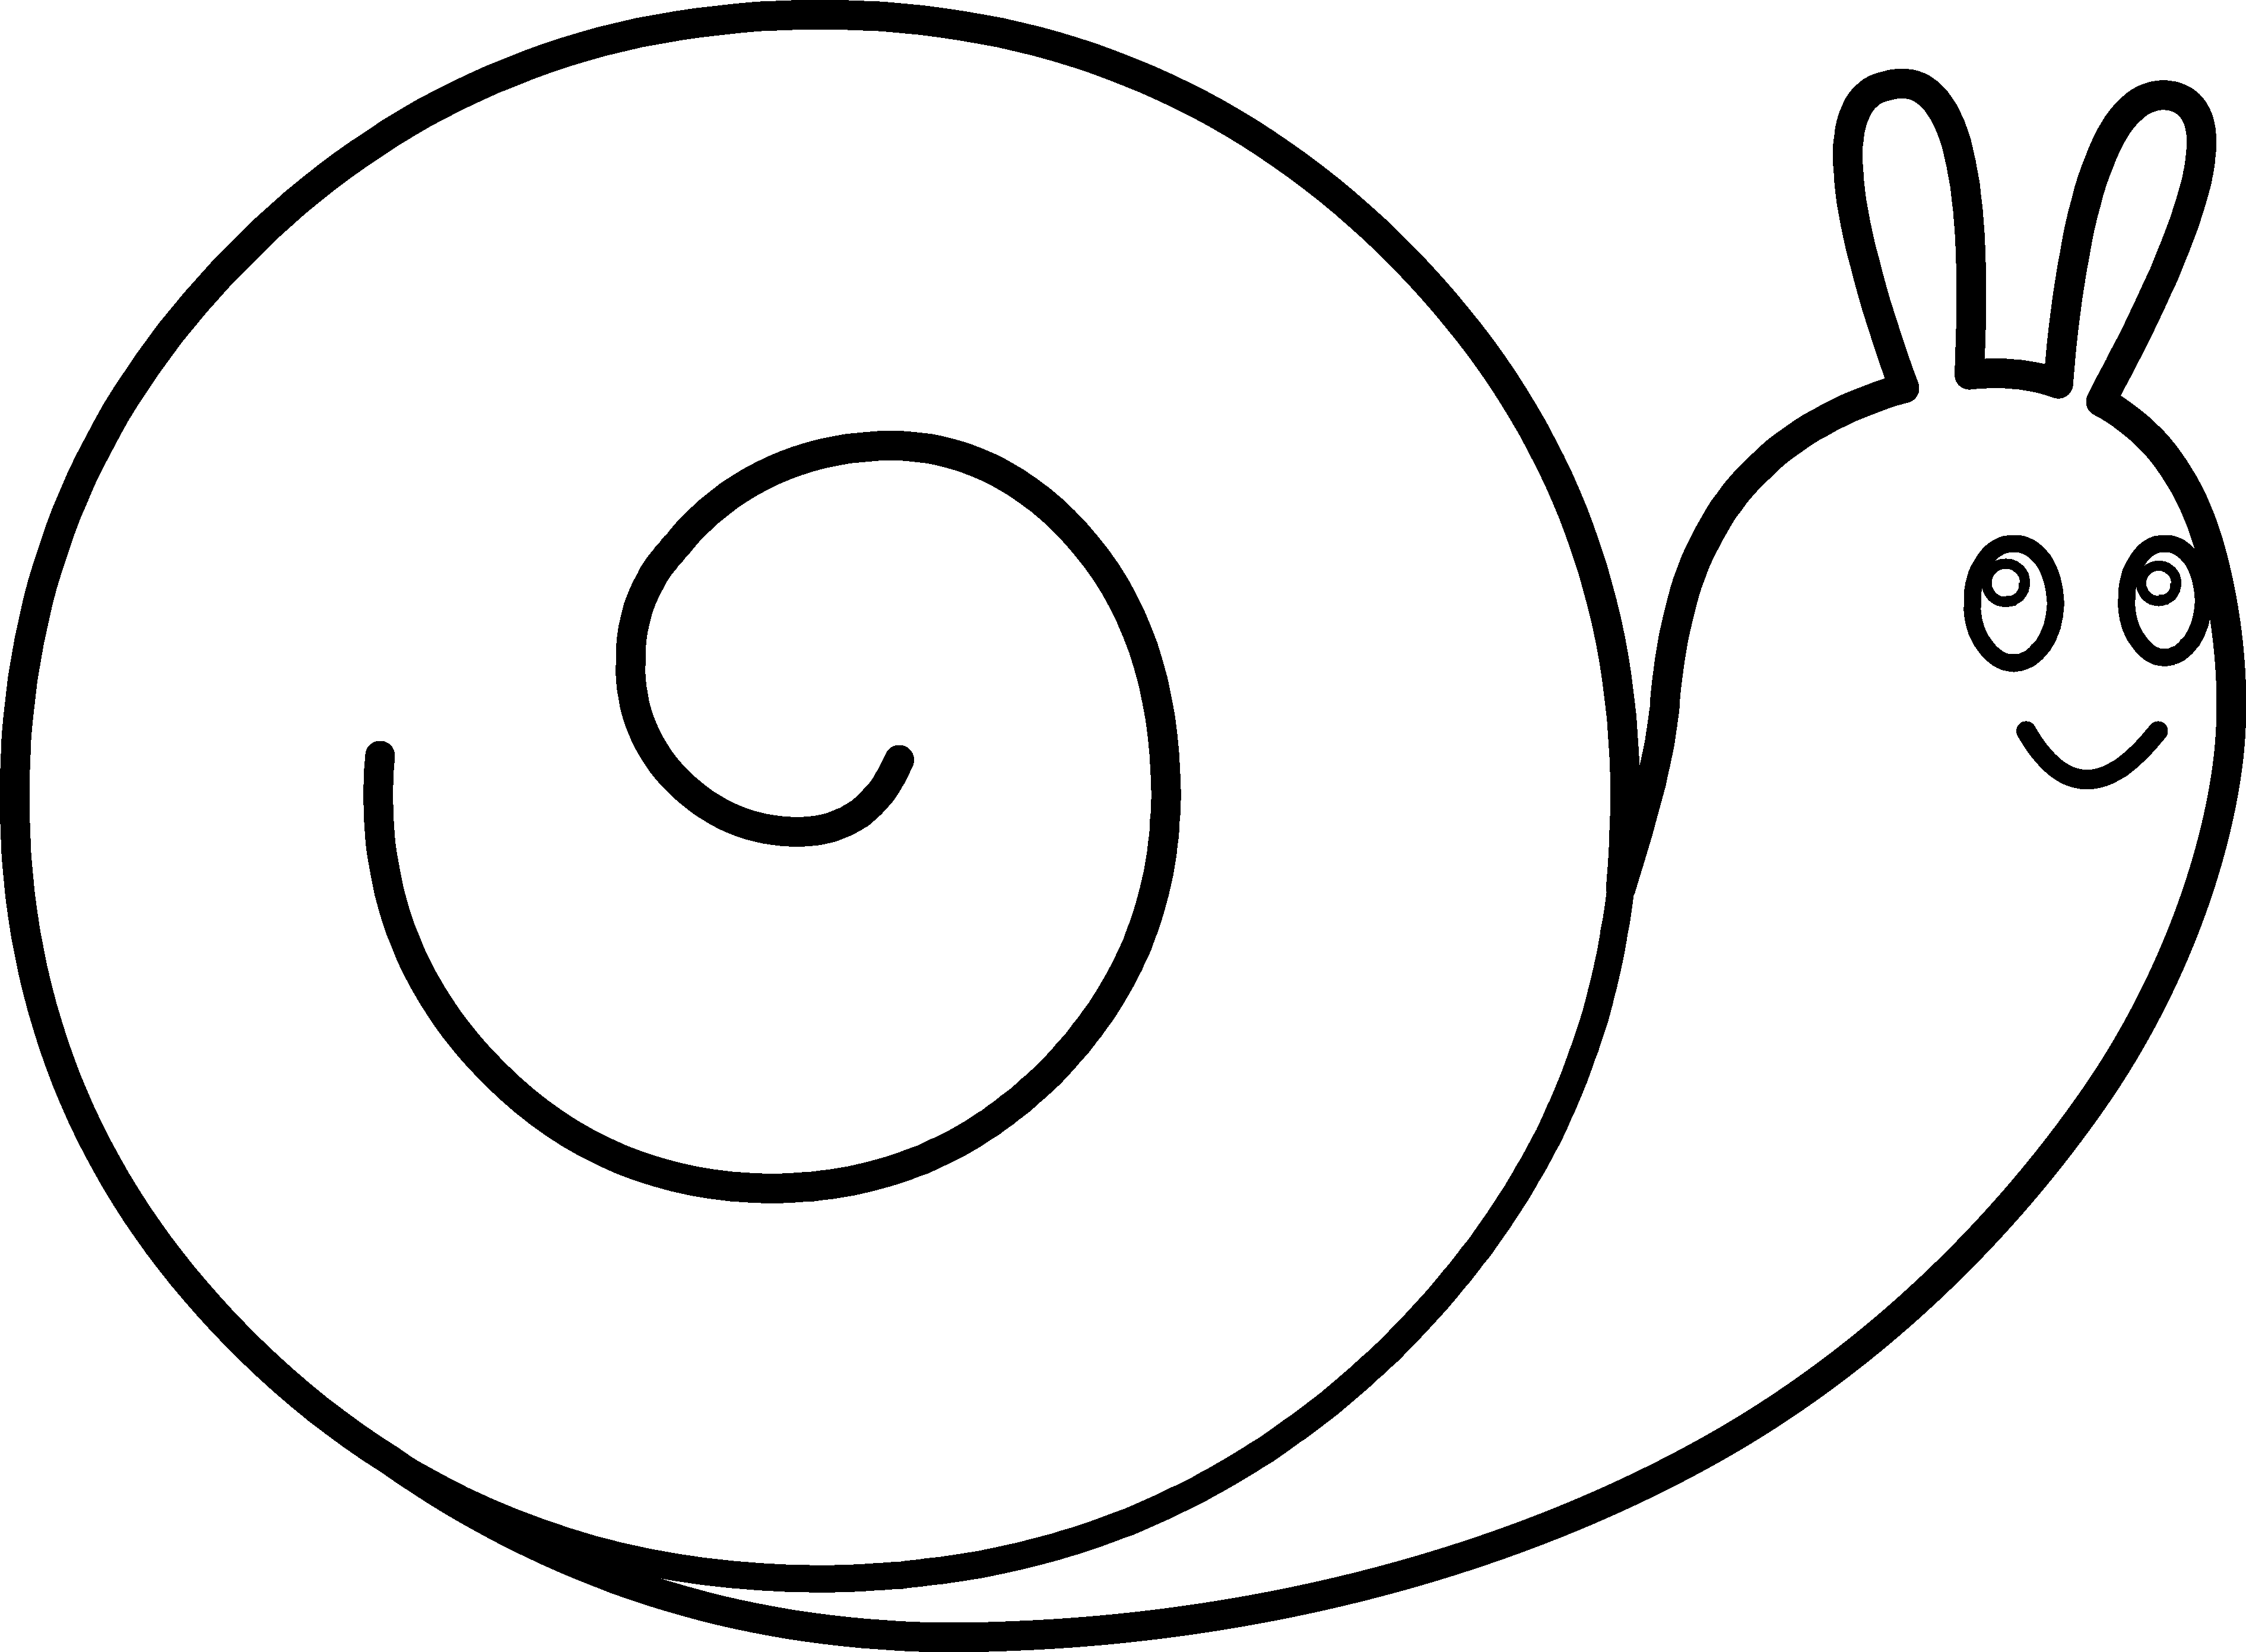 Snail Drawing - ClipArt Best